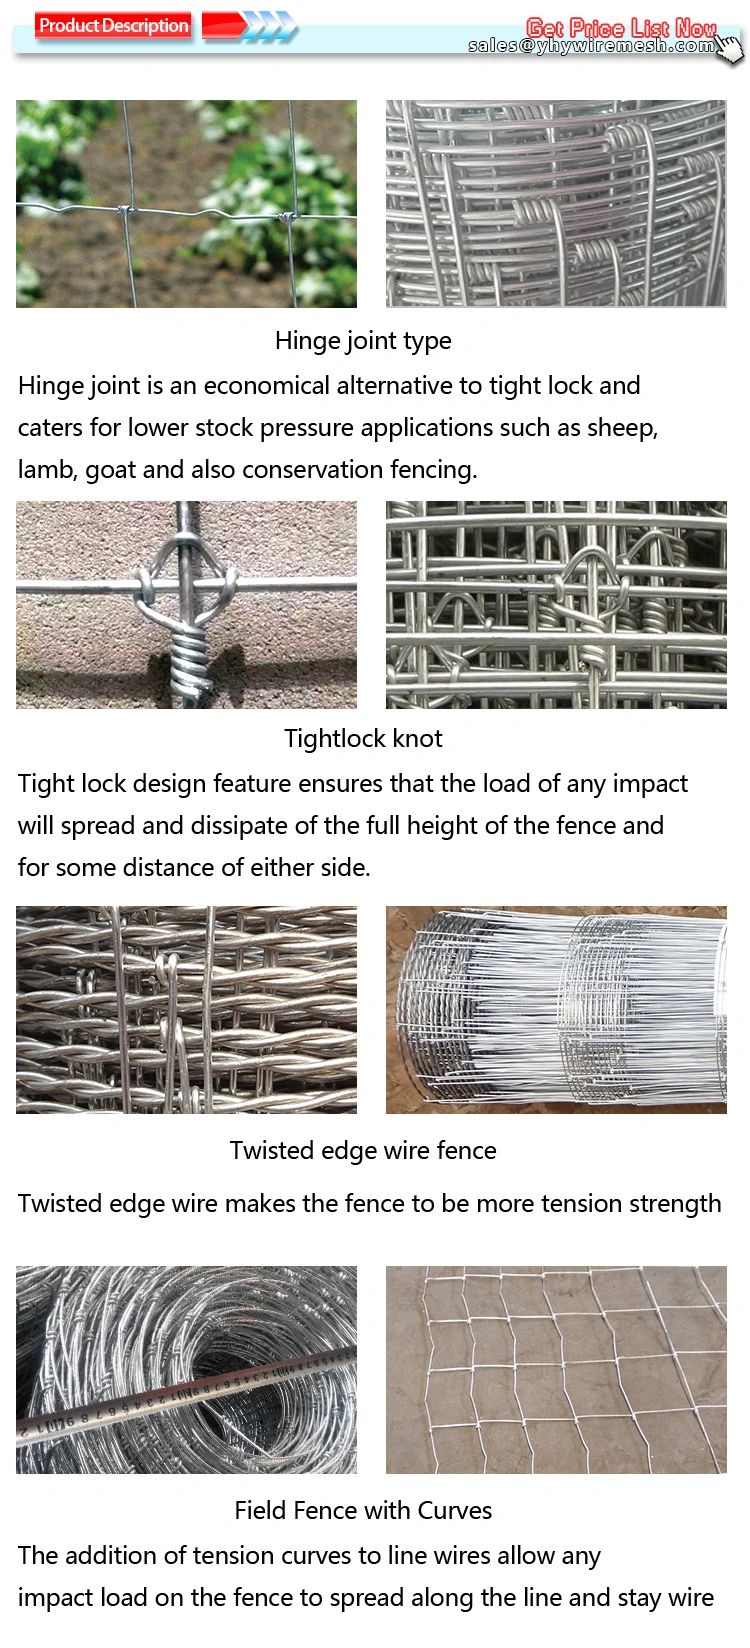 Common Galvanized High Tensile Steel Wire Hinge Joint Fence